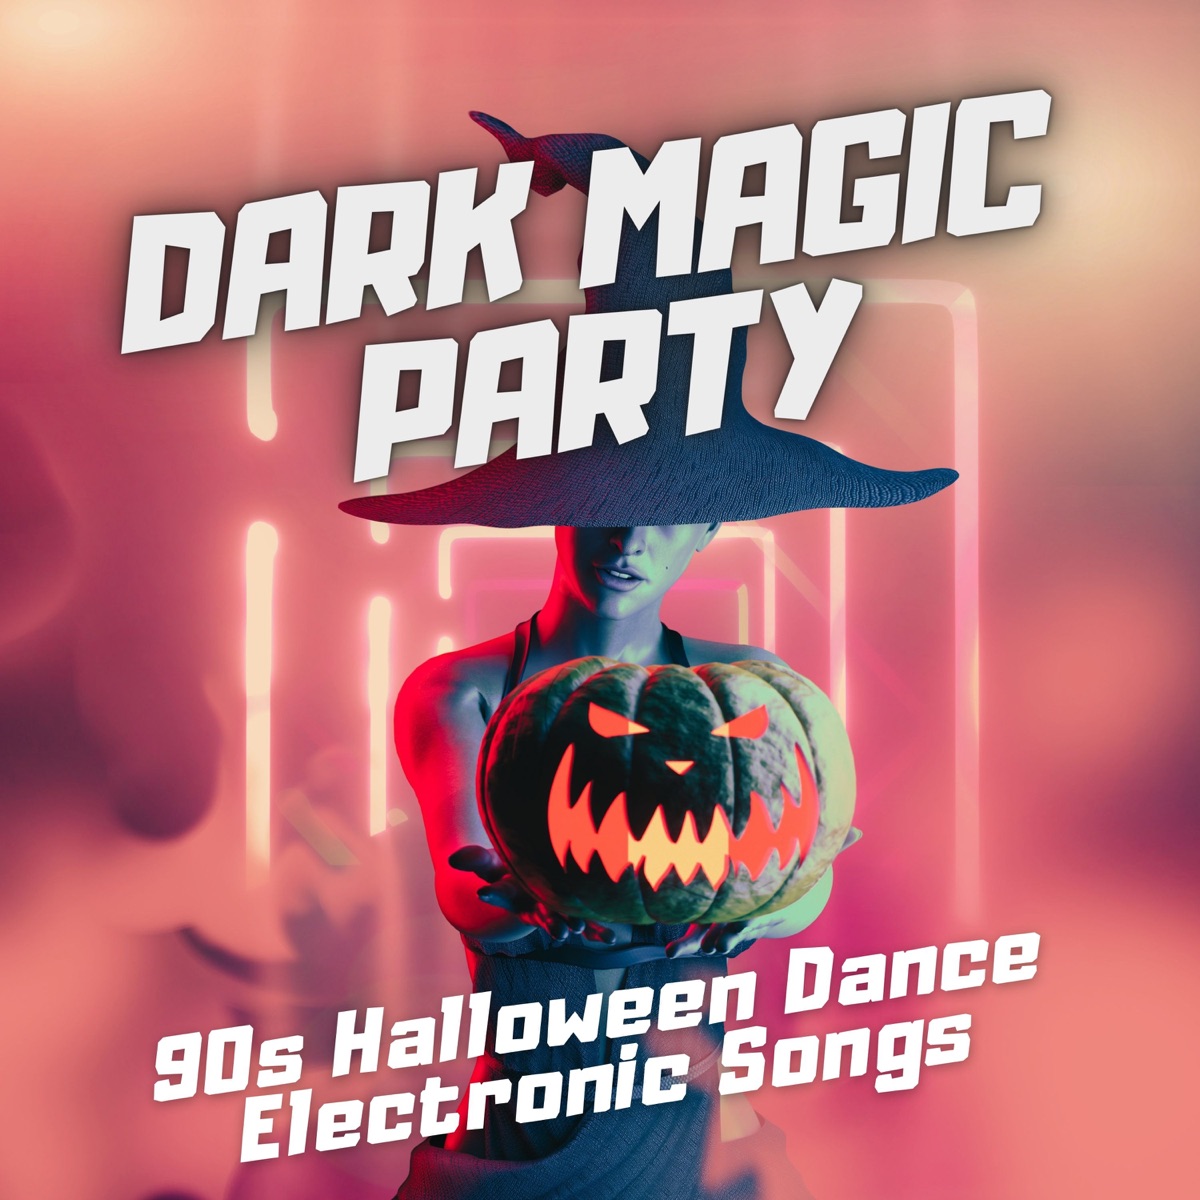 Dark Magic Party - 90s Halloween Dance Electronic Songs by Halloween Trance  Party on Apple Music